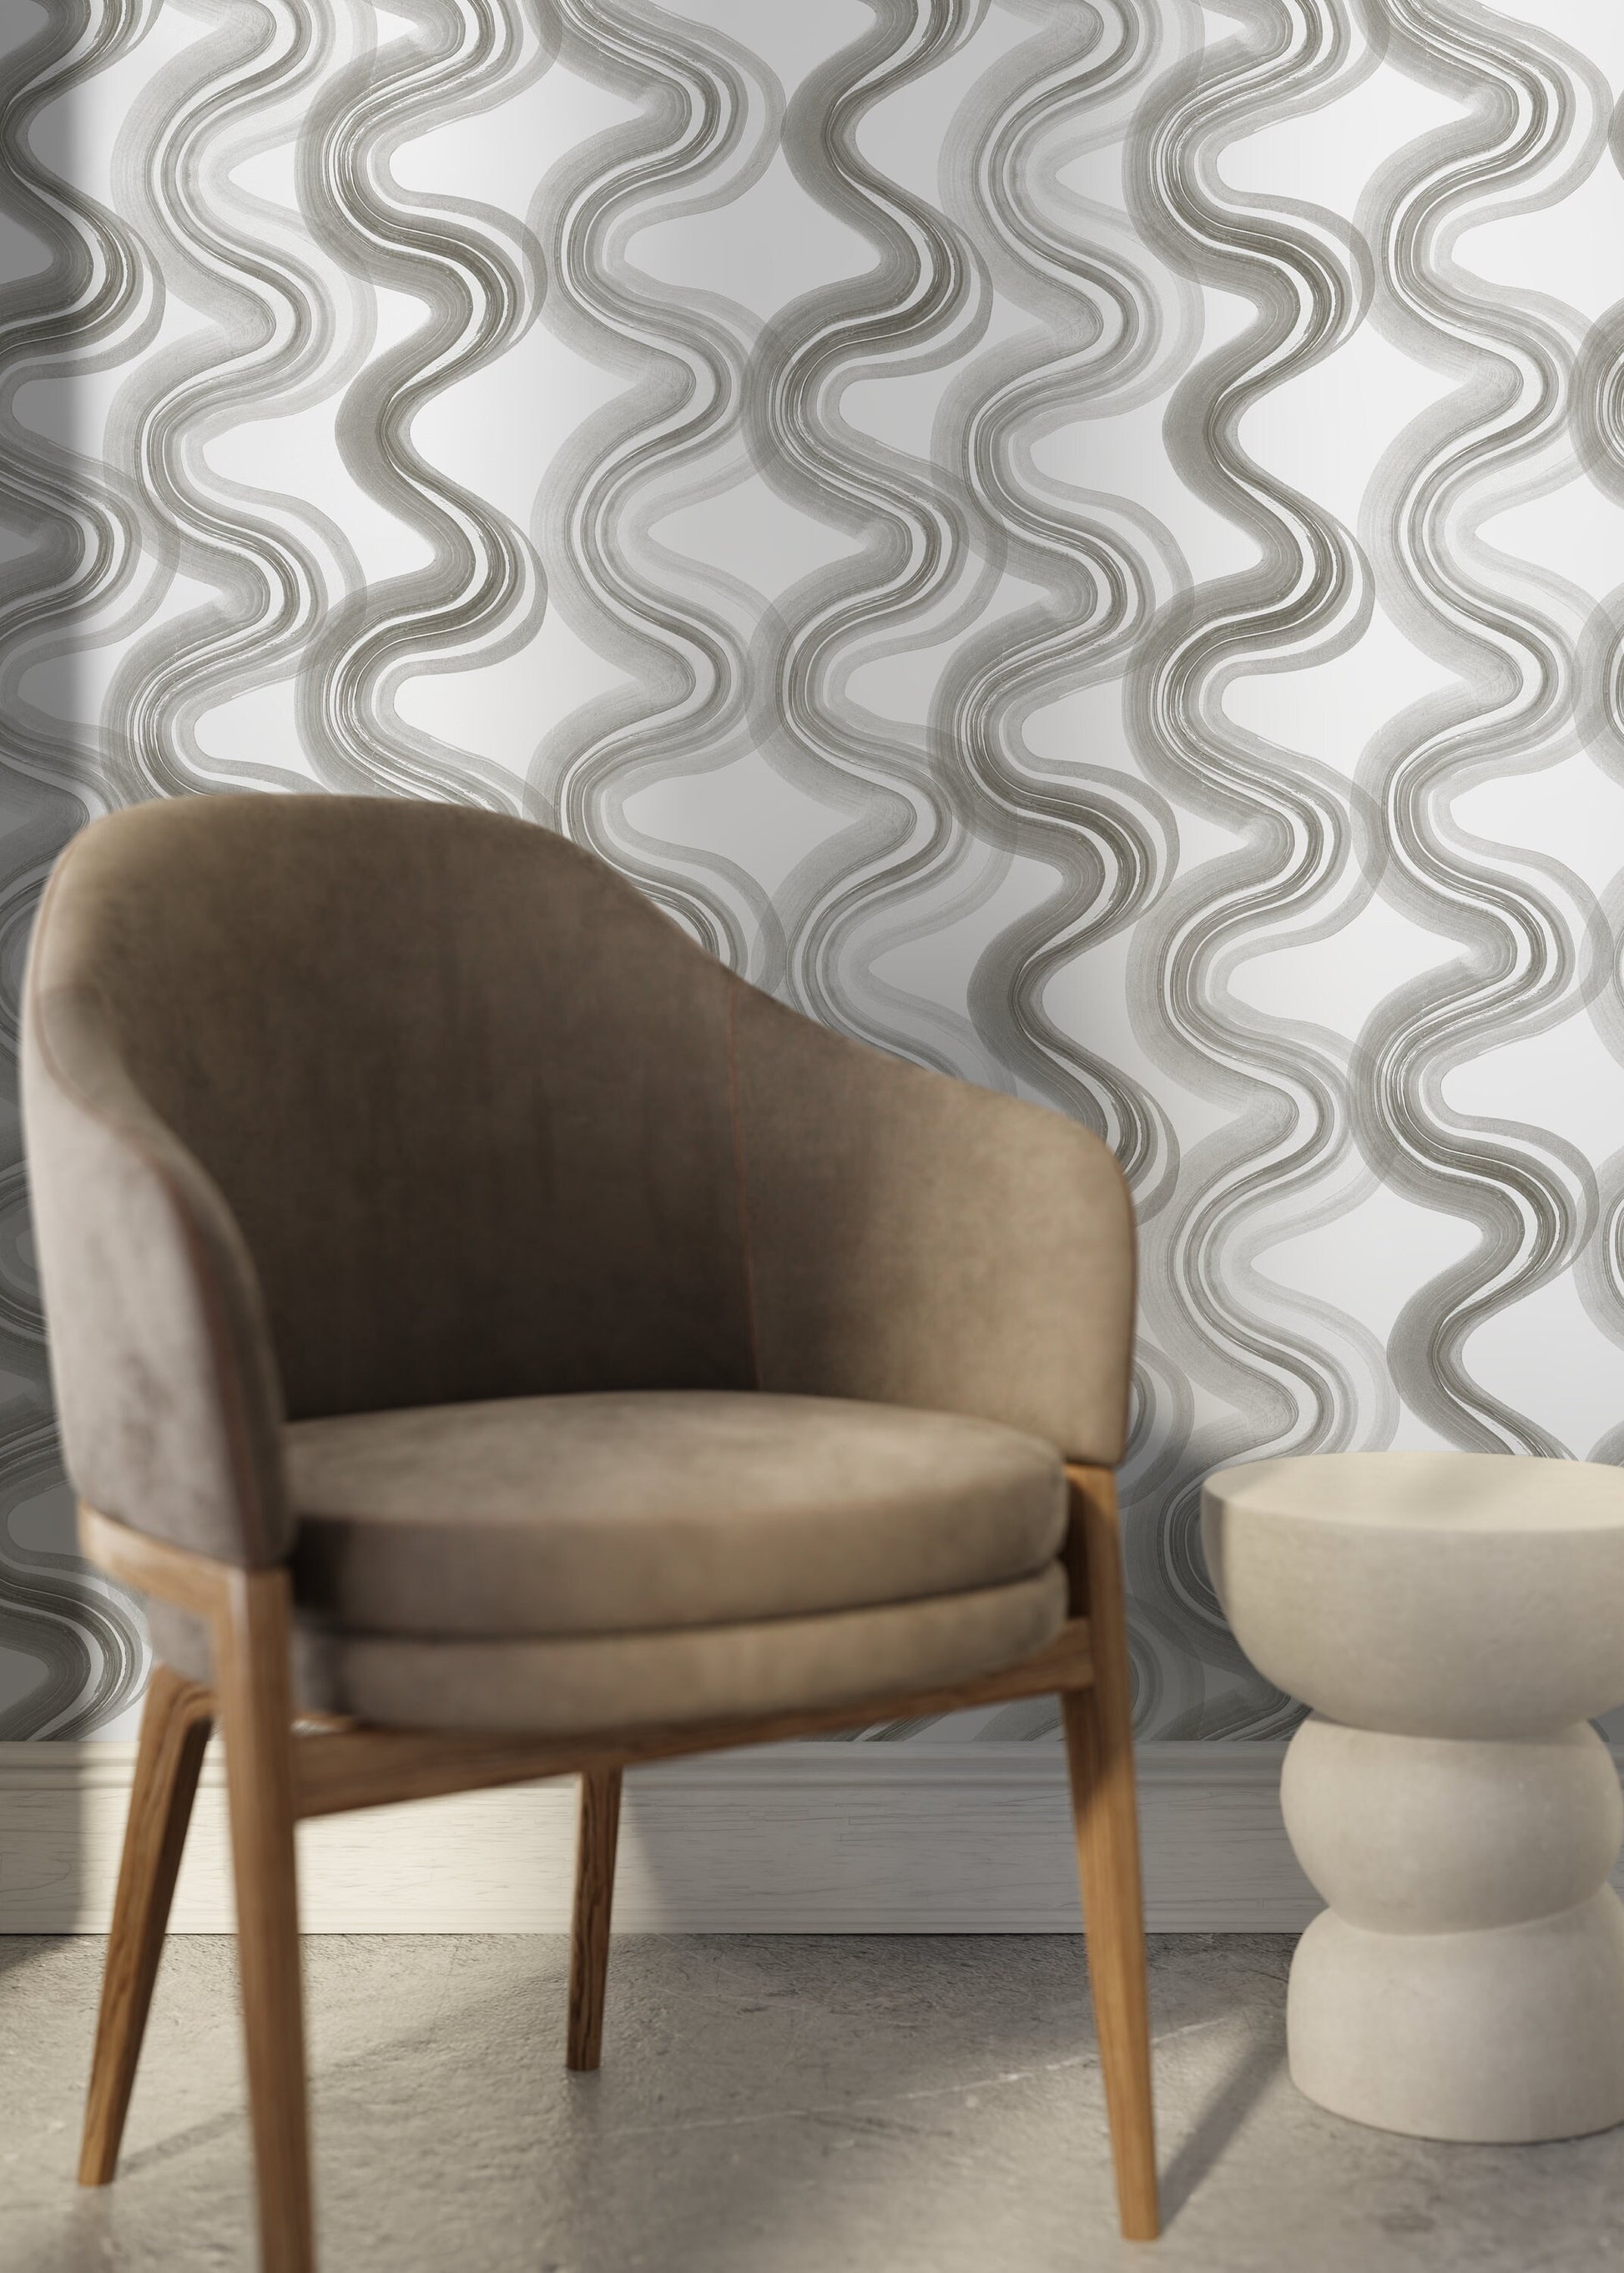 Gray Abstract Ink Wallpaper / Peel and Stick Wallpaper Removable Wallpaper Home Decor Wall Art Wall Decor Room Decor - C984